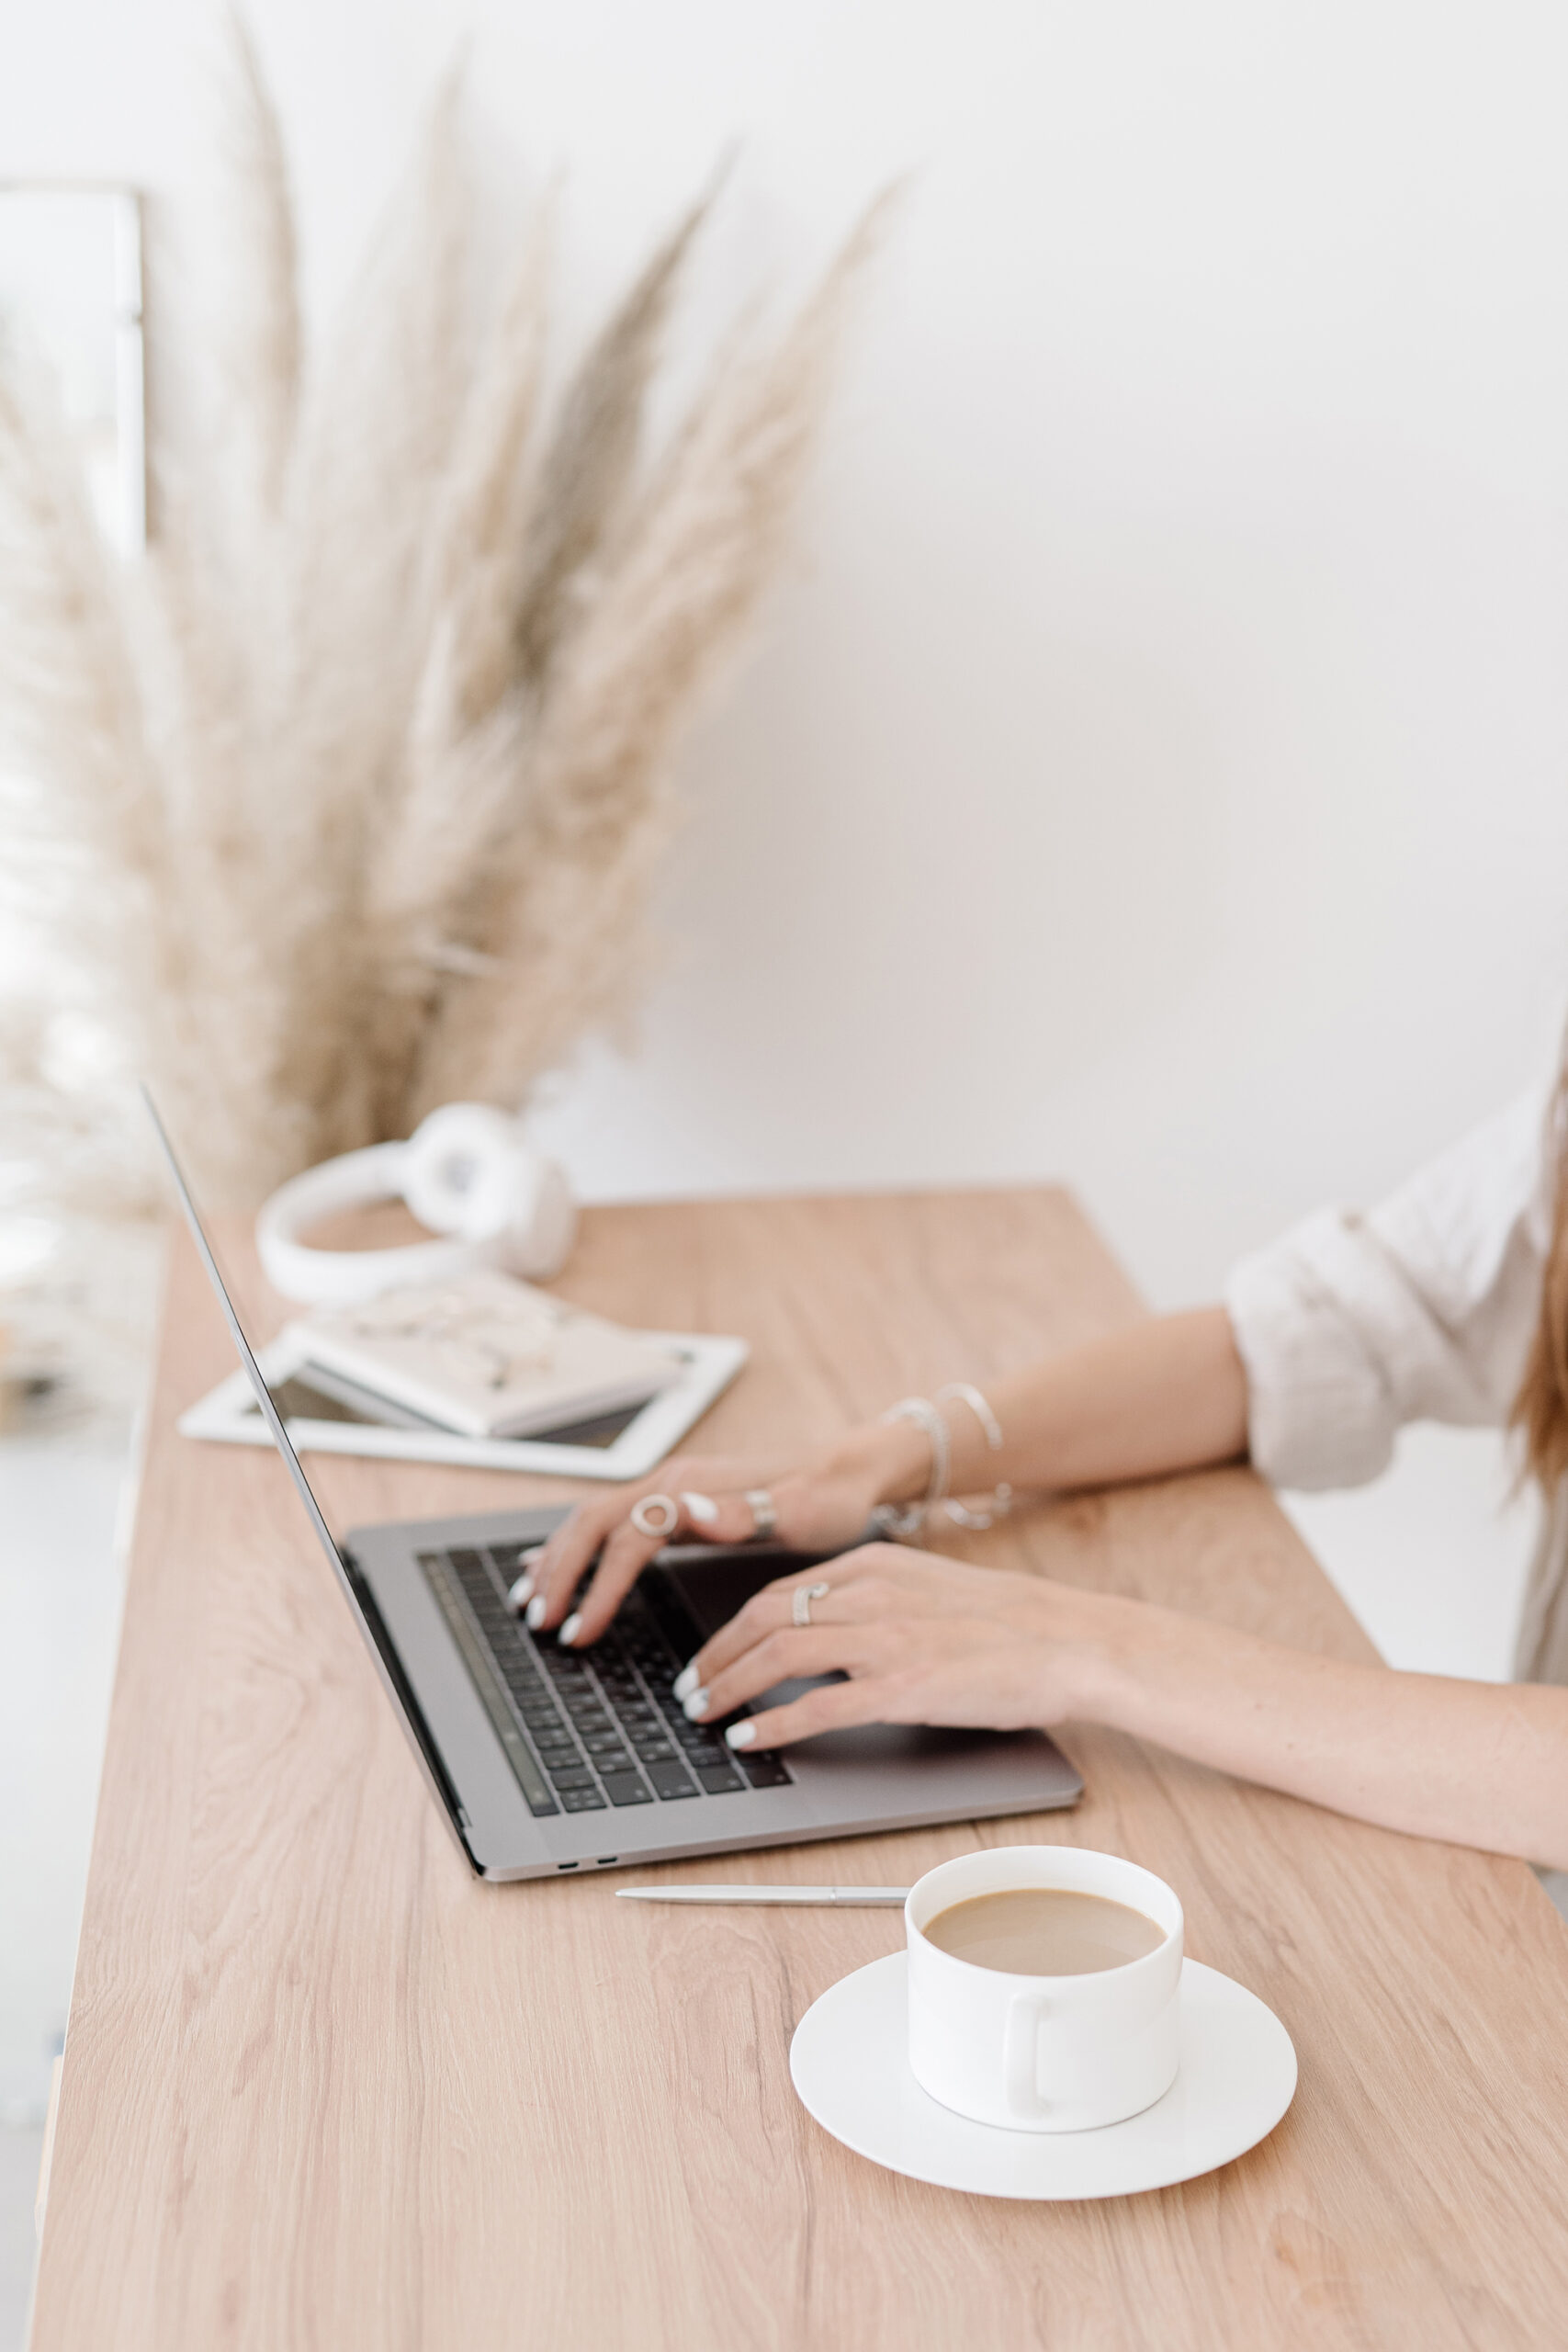 contact steffi. picture of a woman sitting on a wooden desk with a laptop and a cup of coffee